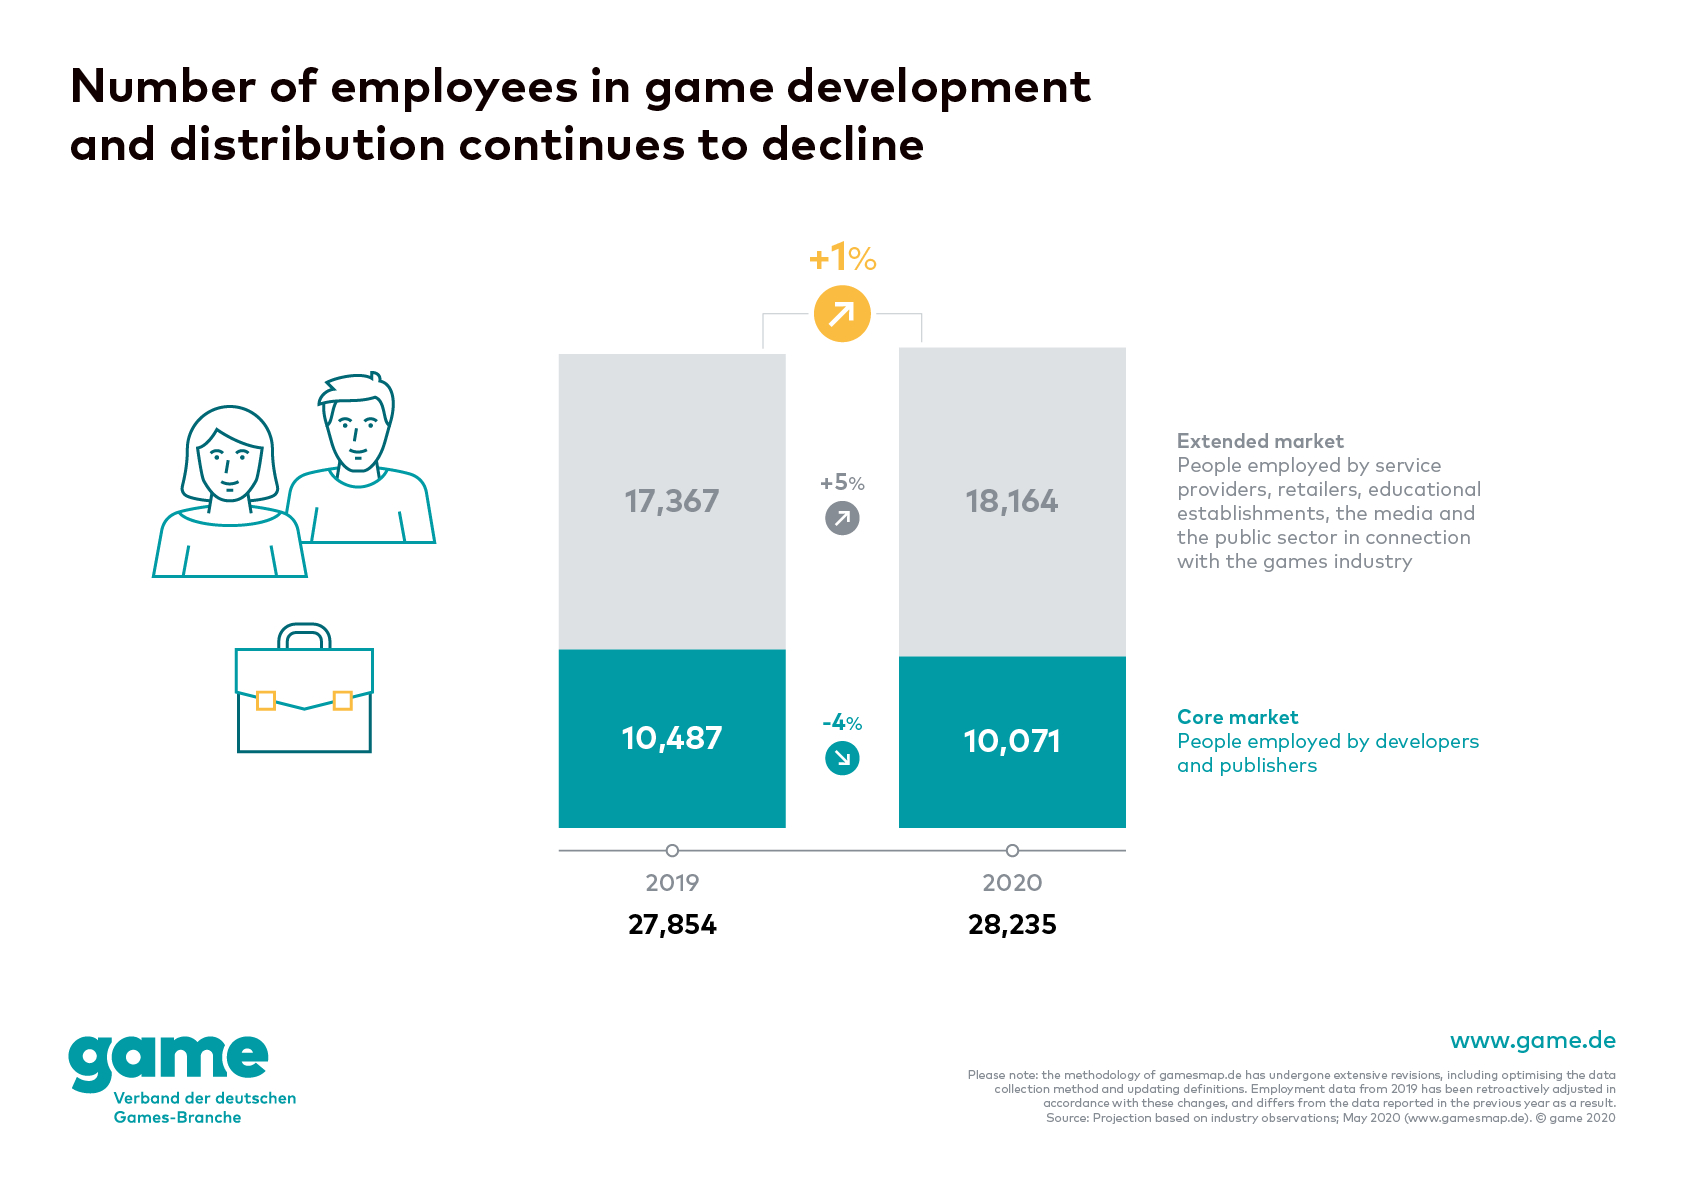 Number of employees in game development and distribution